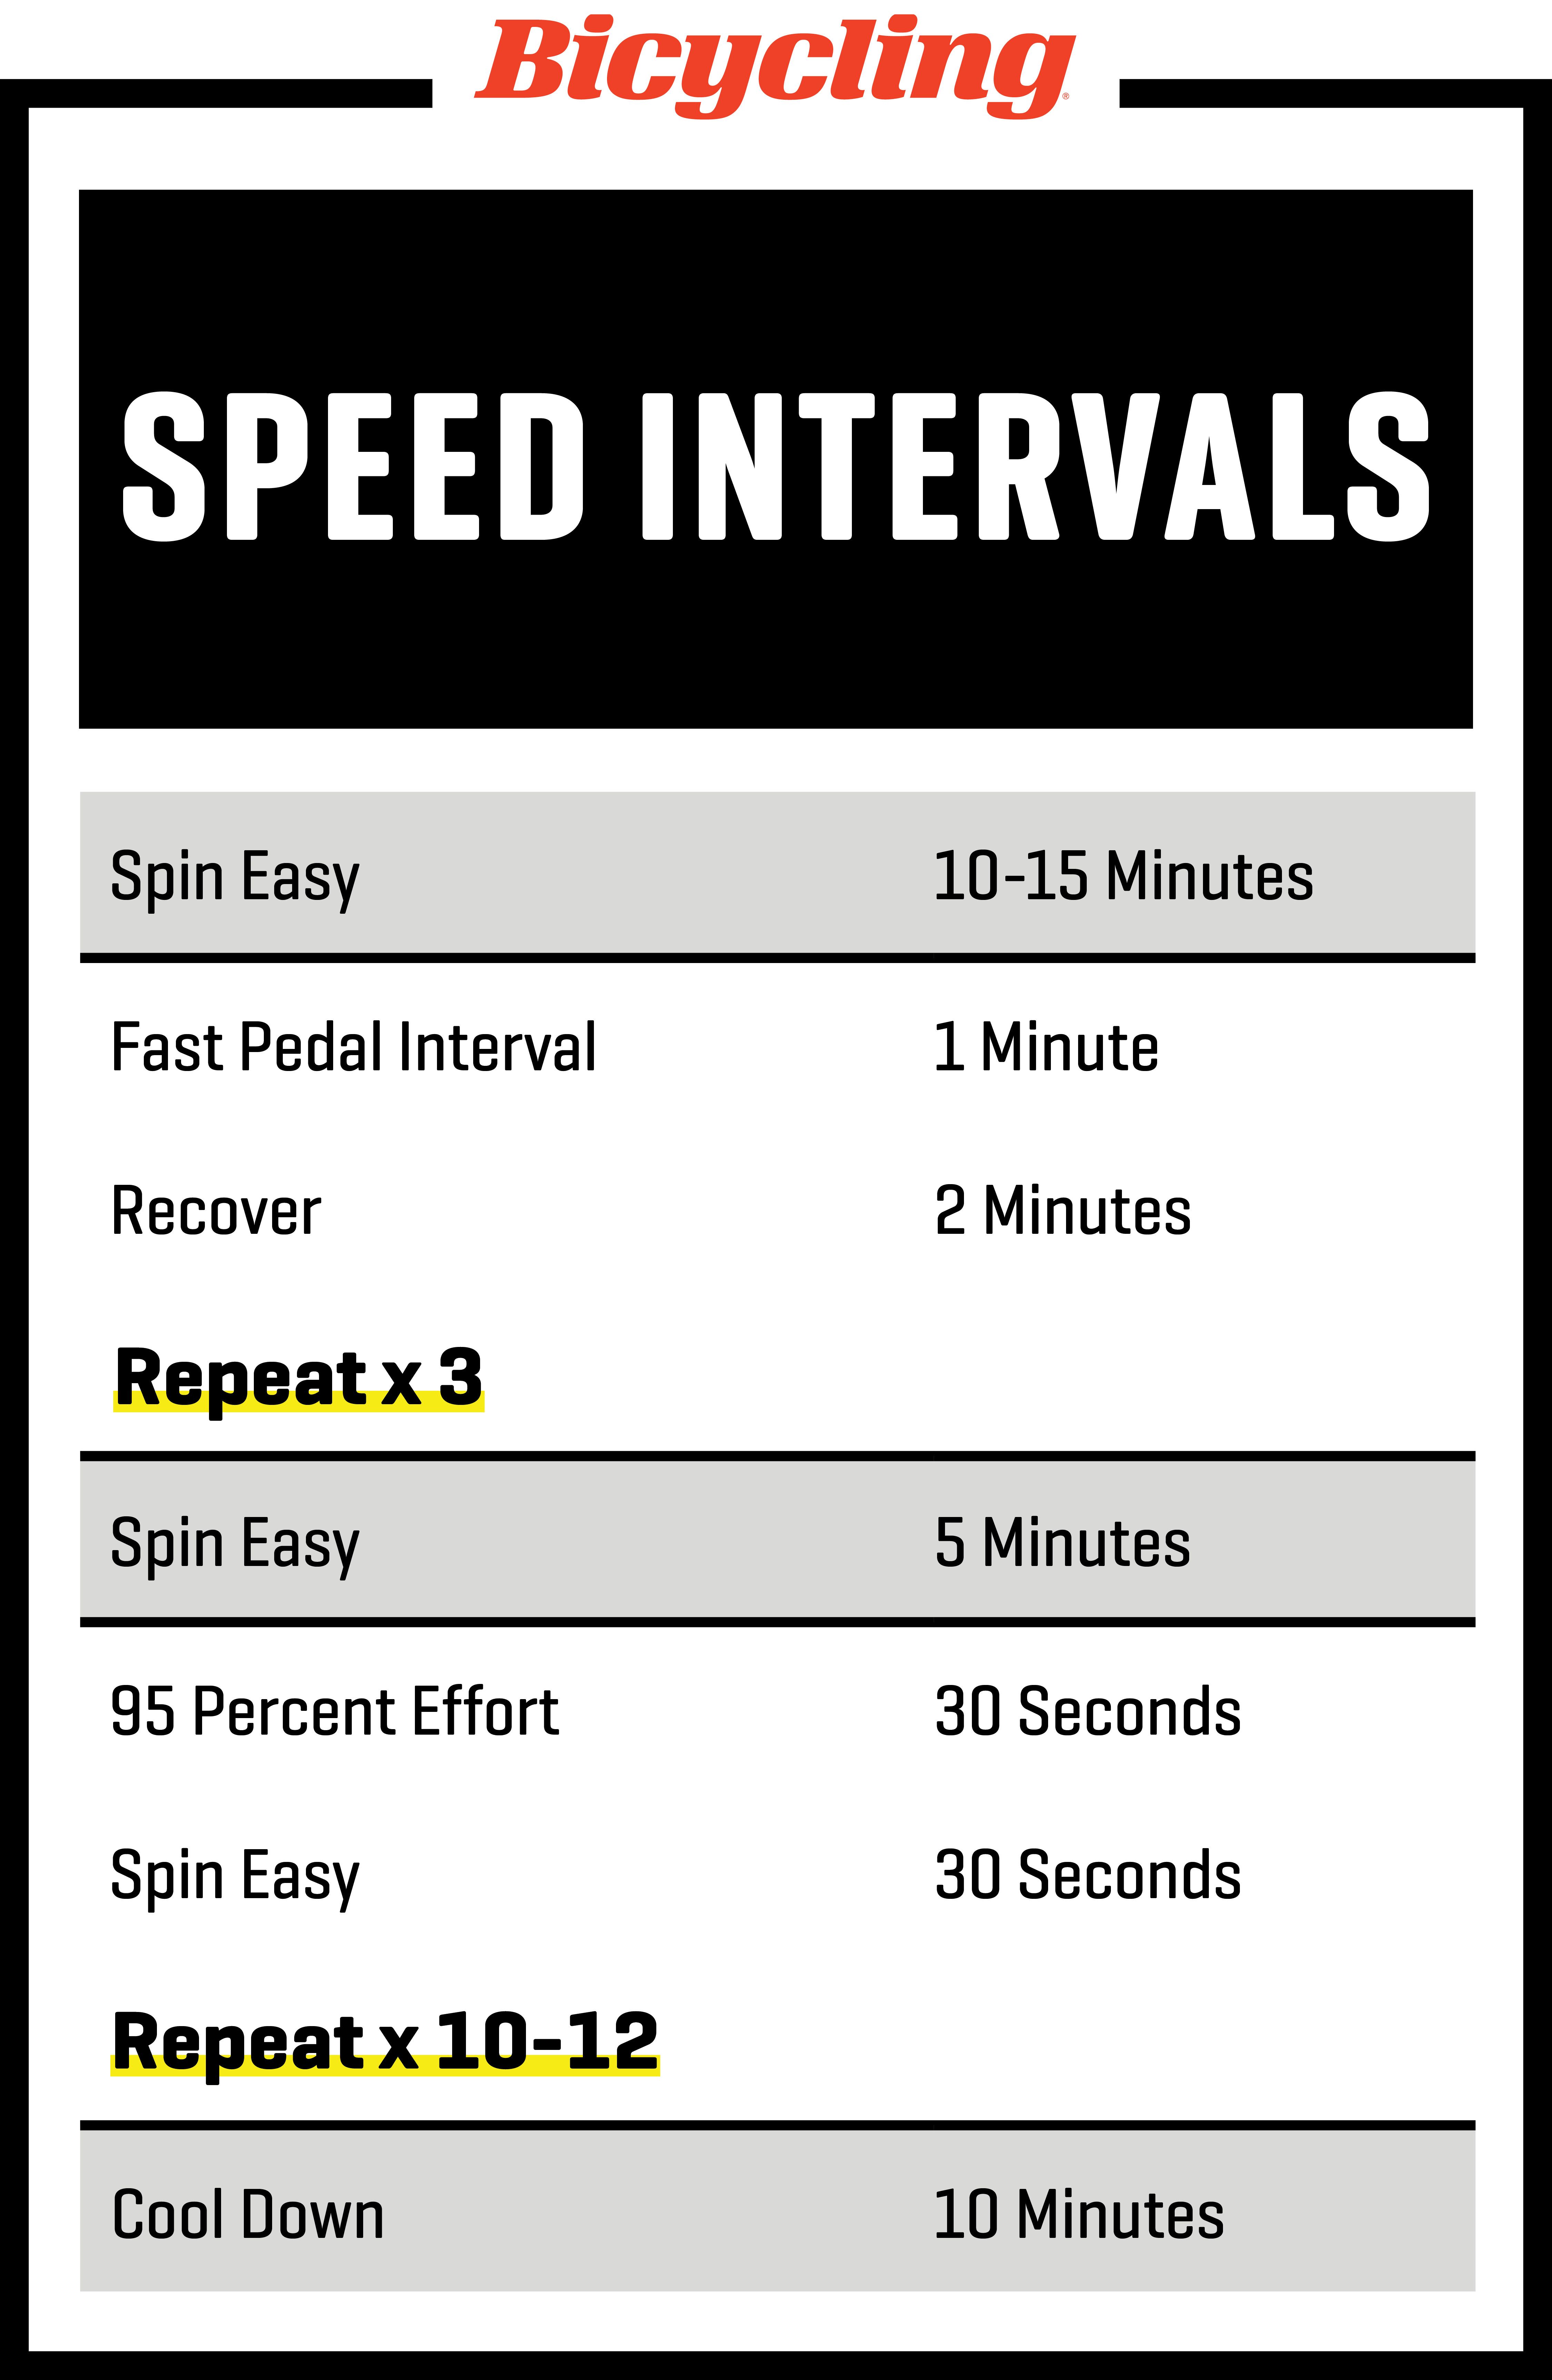 30 minute indoor cycling workout